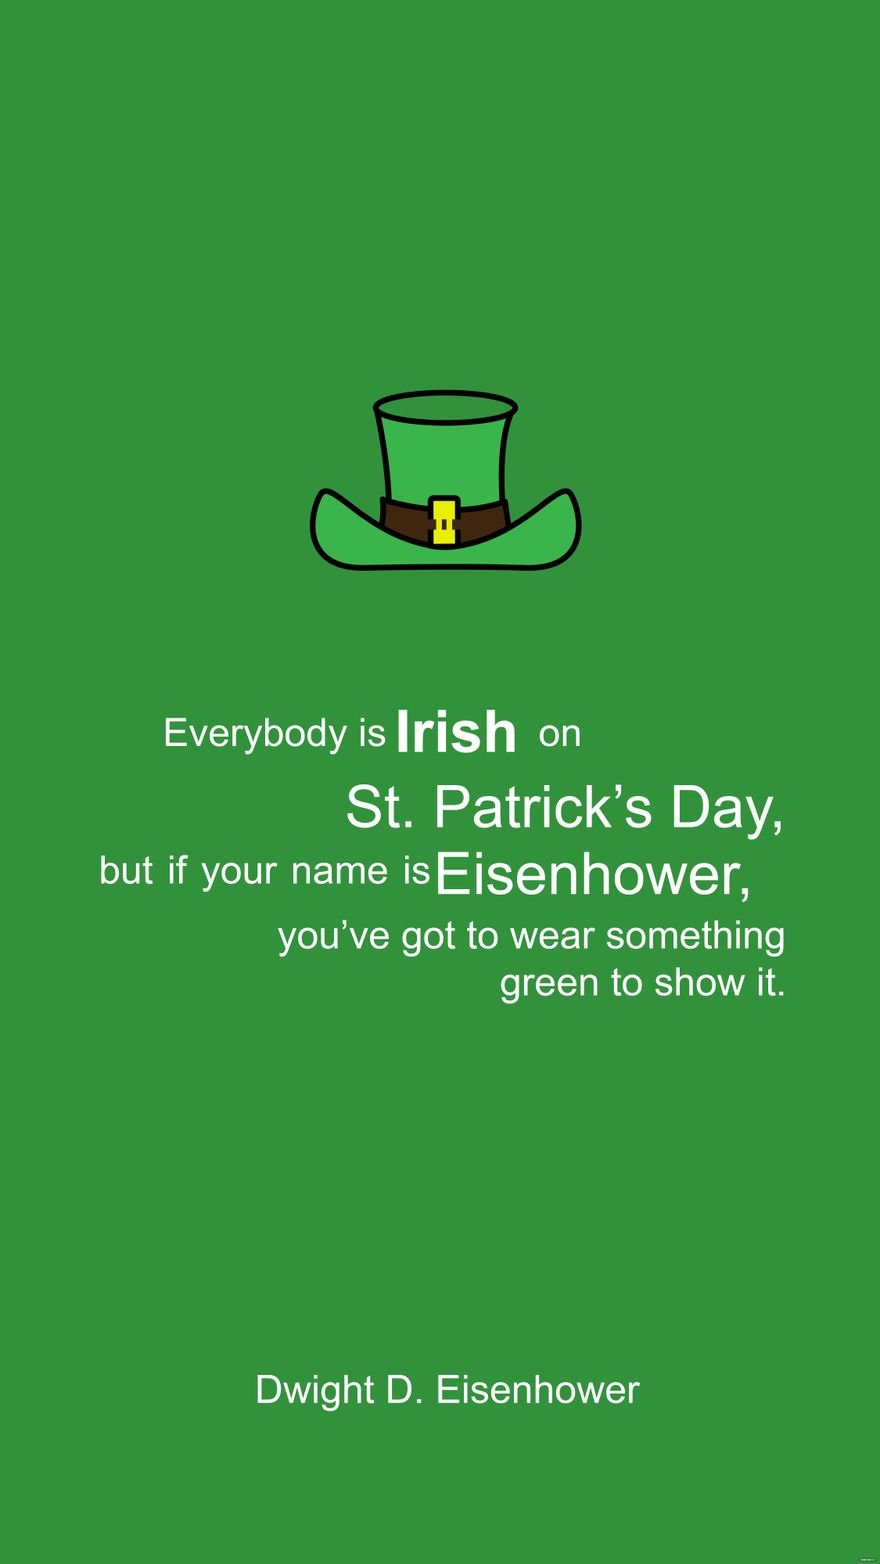 Free Dwight D. Eisenhower - Everybody is Irish on St. Patrick’s Day, but if your name is Eisenhower, you’ve got to wear something green to show it.